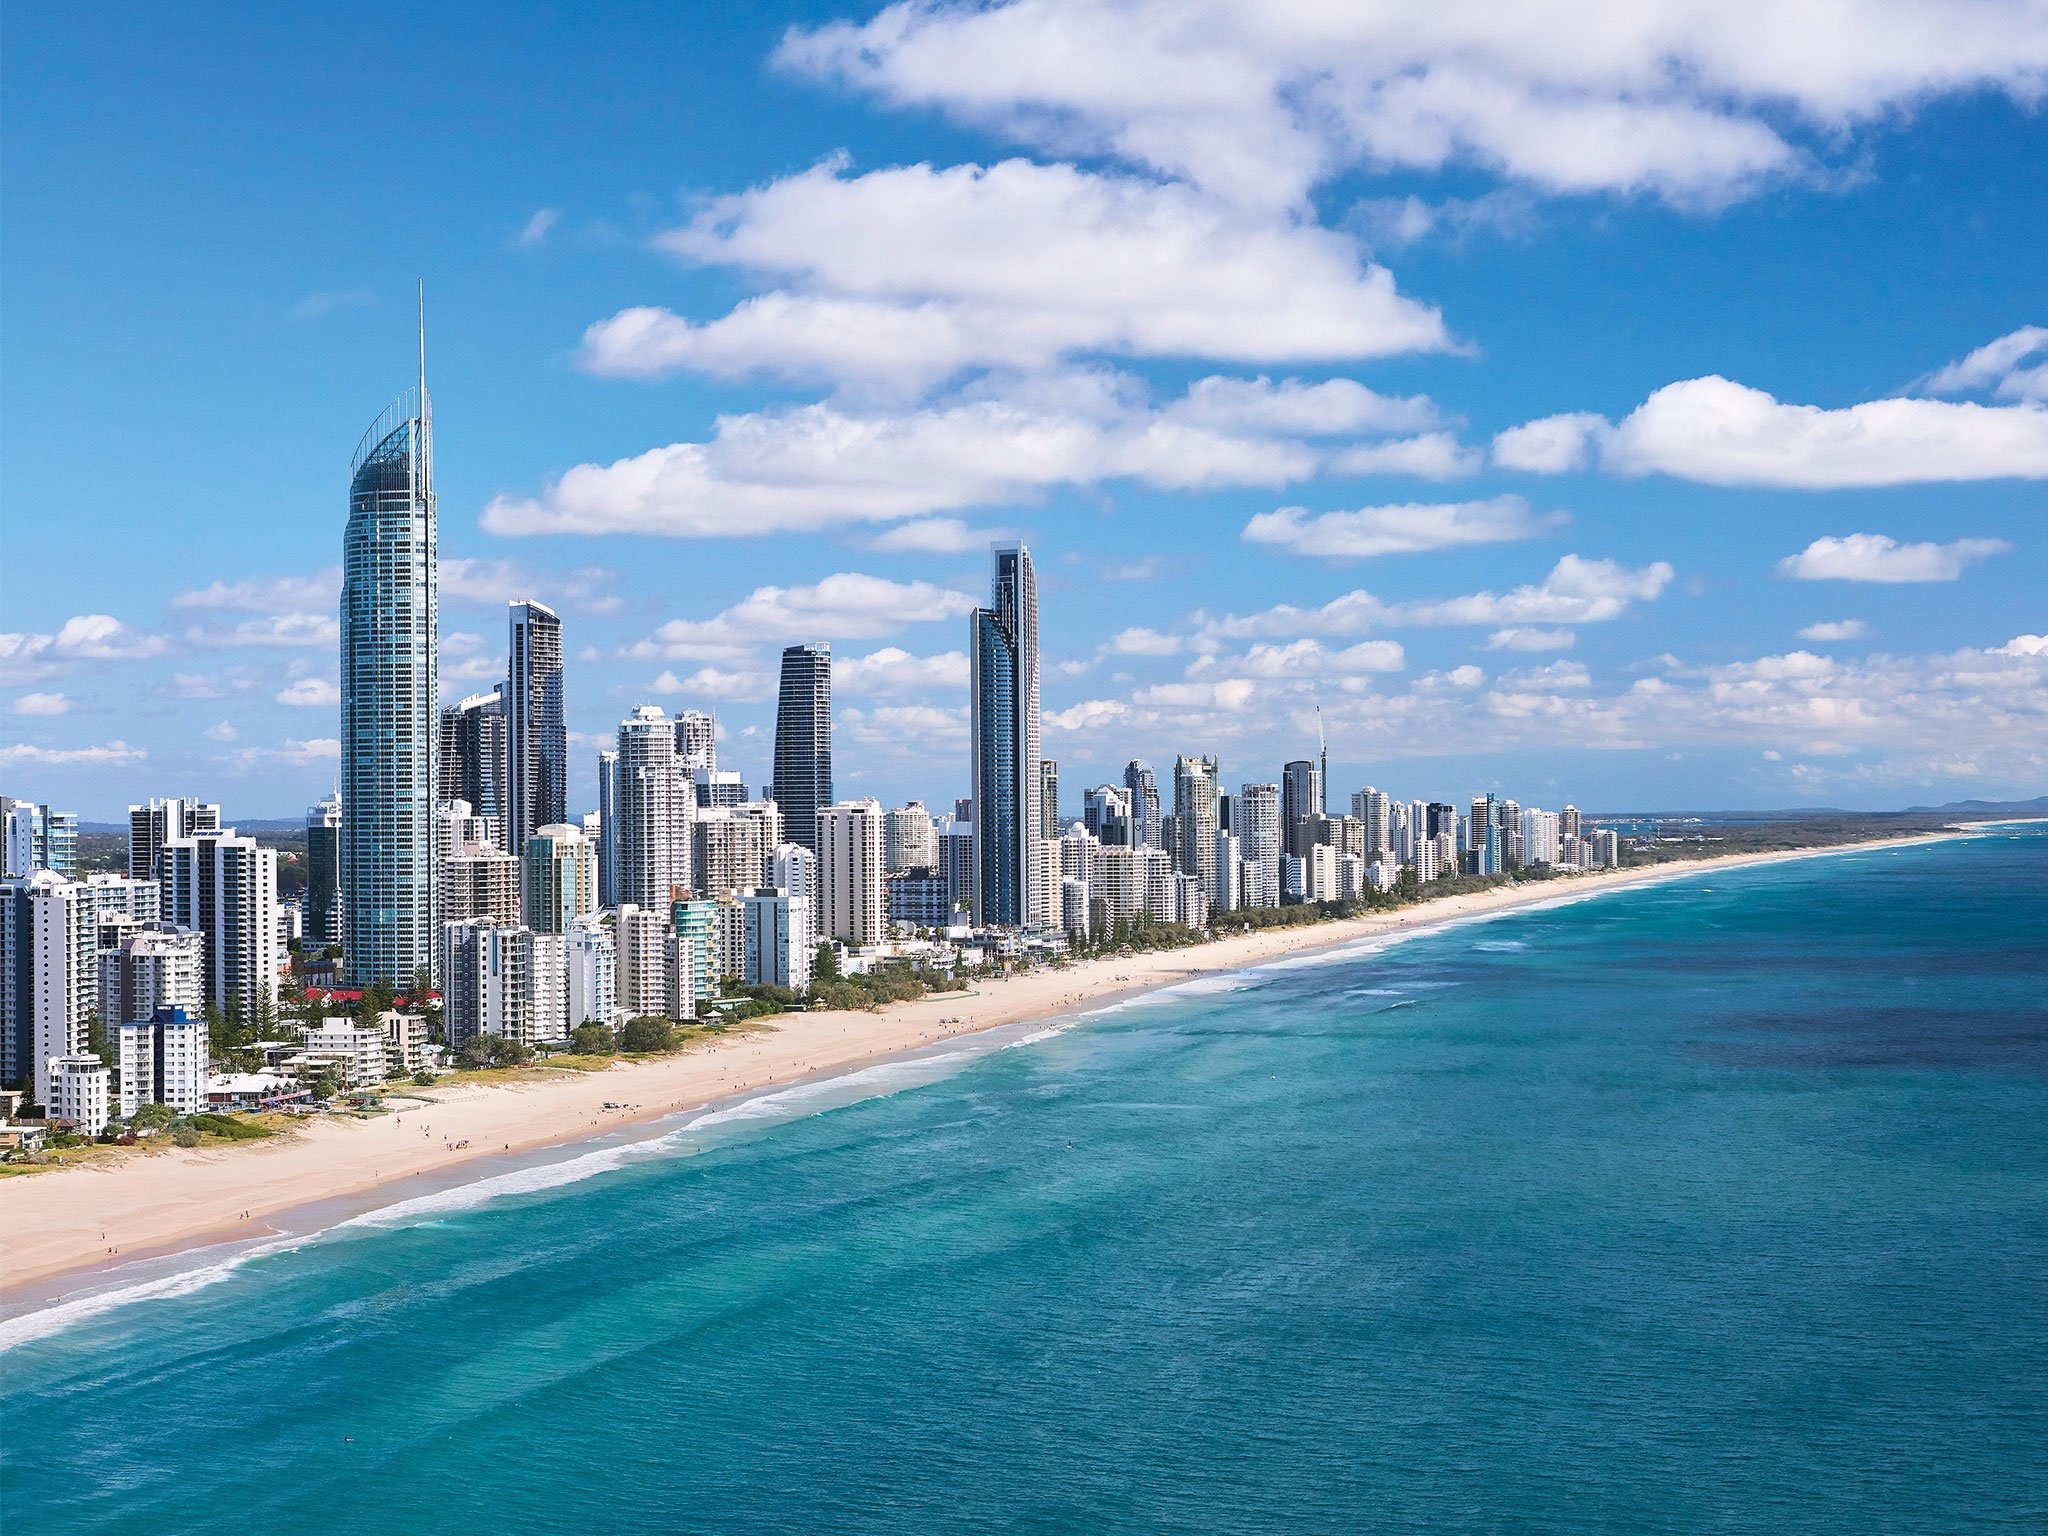 Nice Images Collection: Surfers Paradise Desktop Wallpapers